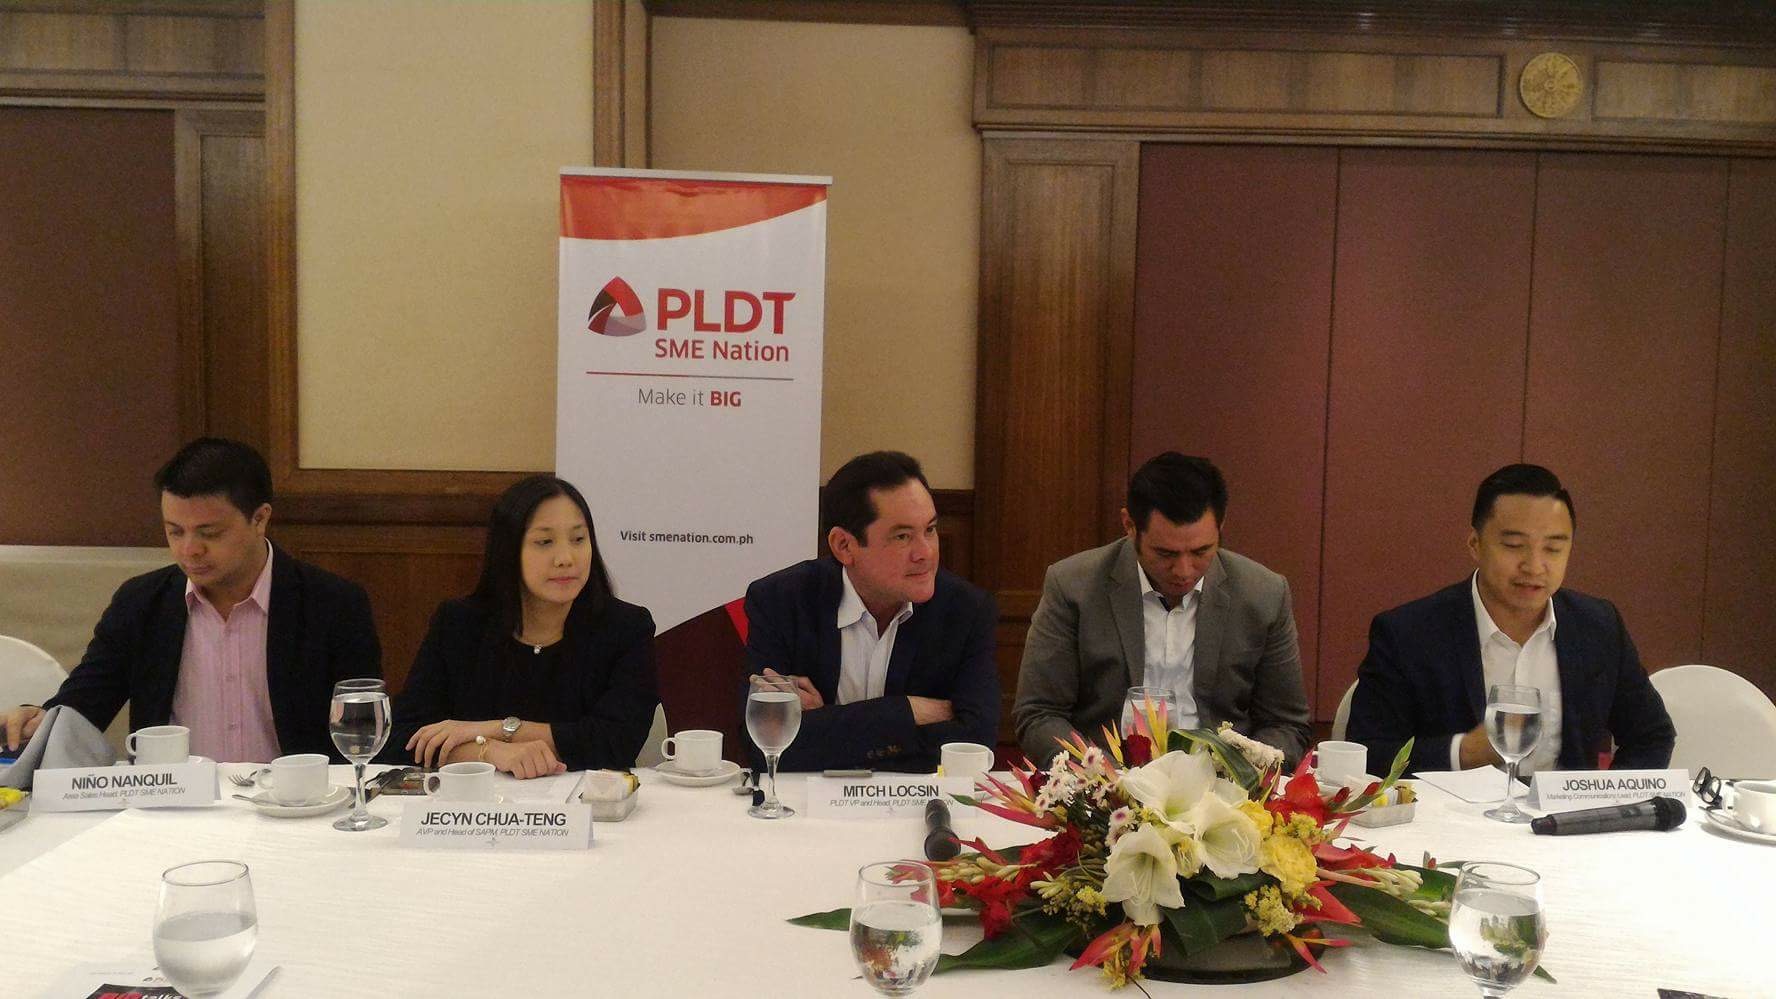 PLDT executives present details of the SME Nation project. (CDN PHOTO/MAURICE JITTY VILLAESTER)